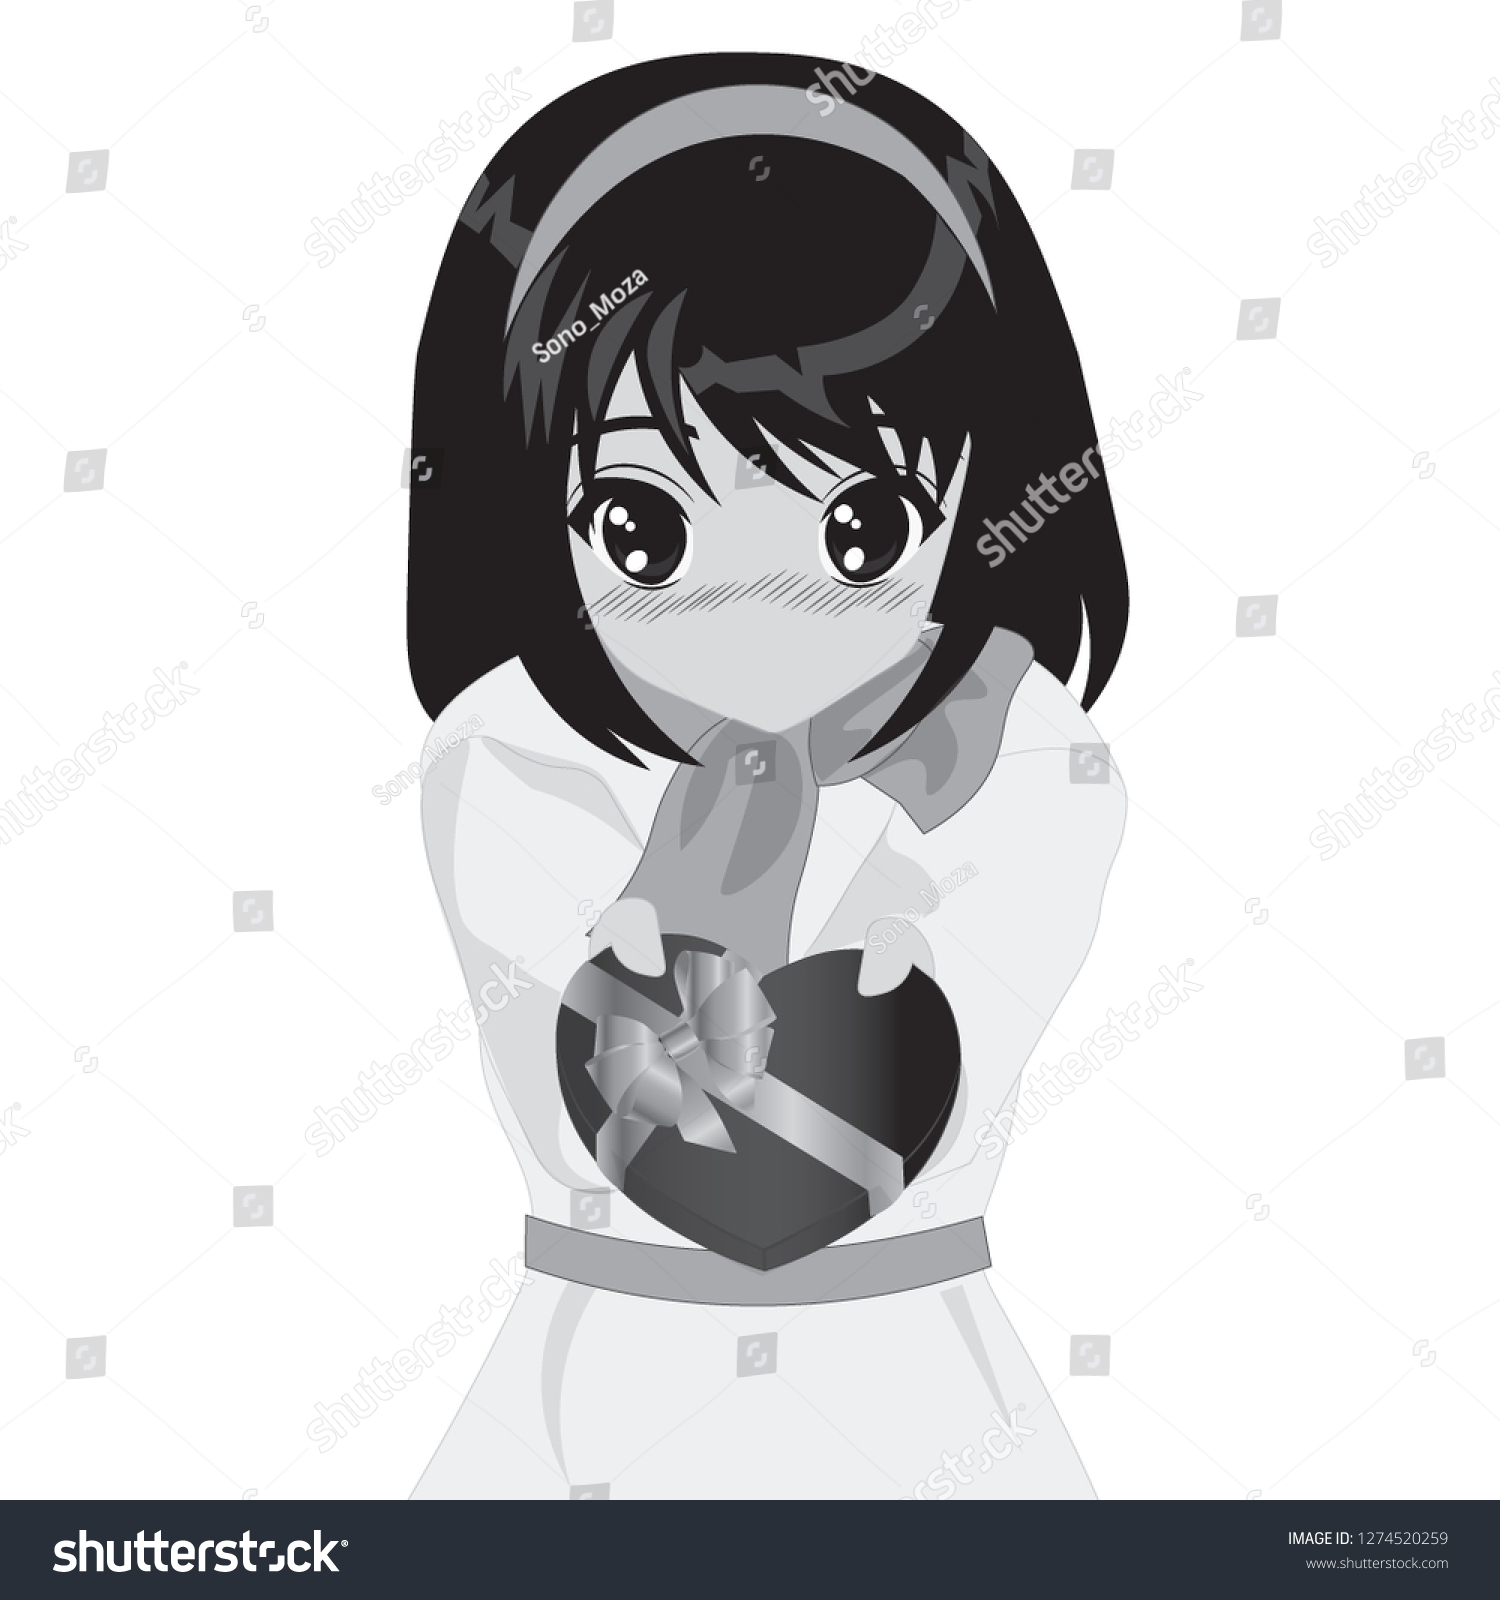 Cute Anime Girl Valentine Day Gift Stock Vector Royalty Free